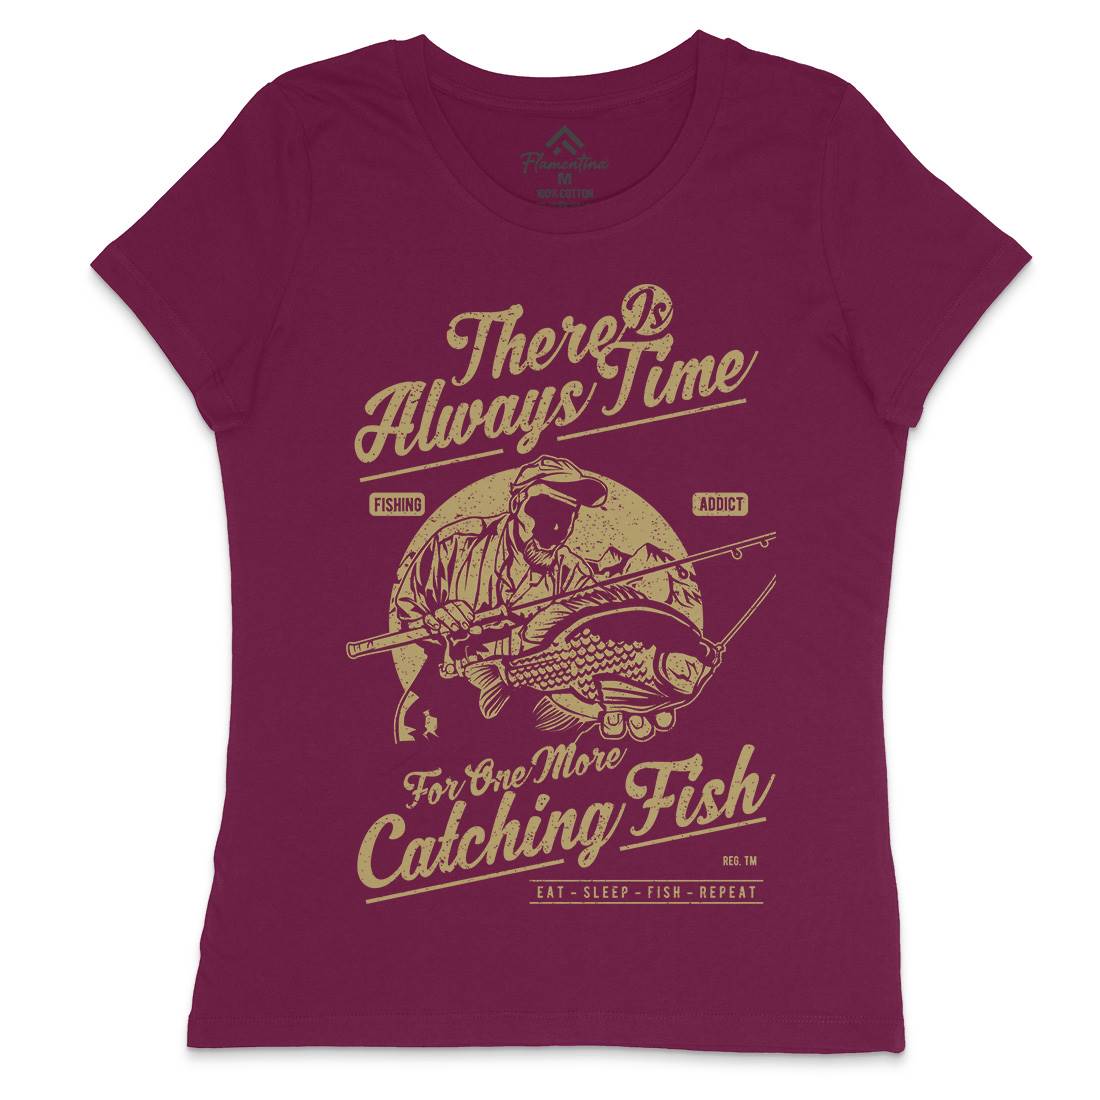 One More Catching Womens Crew Neck T-Shirt Fishing A731